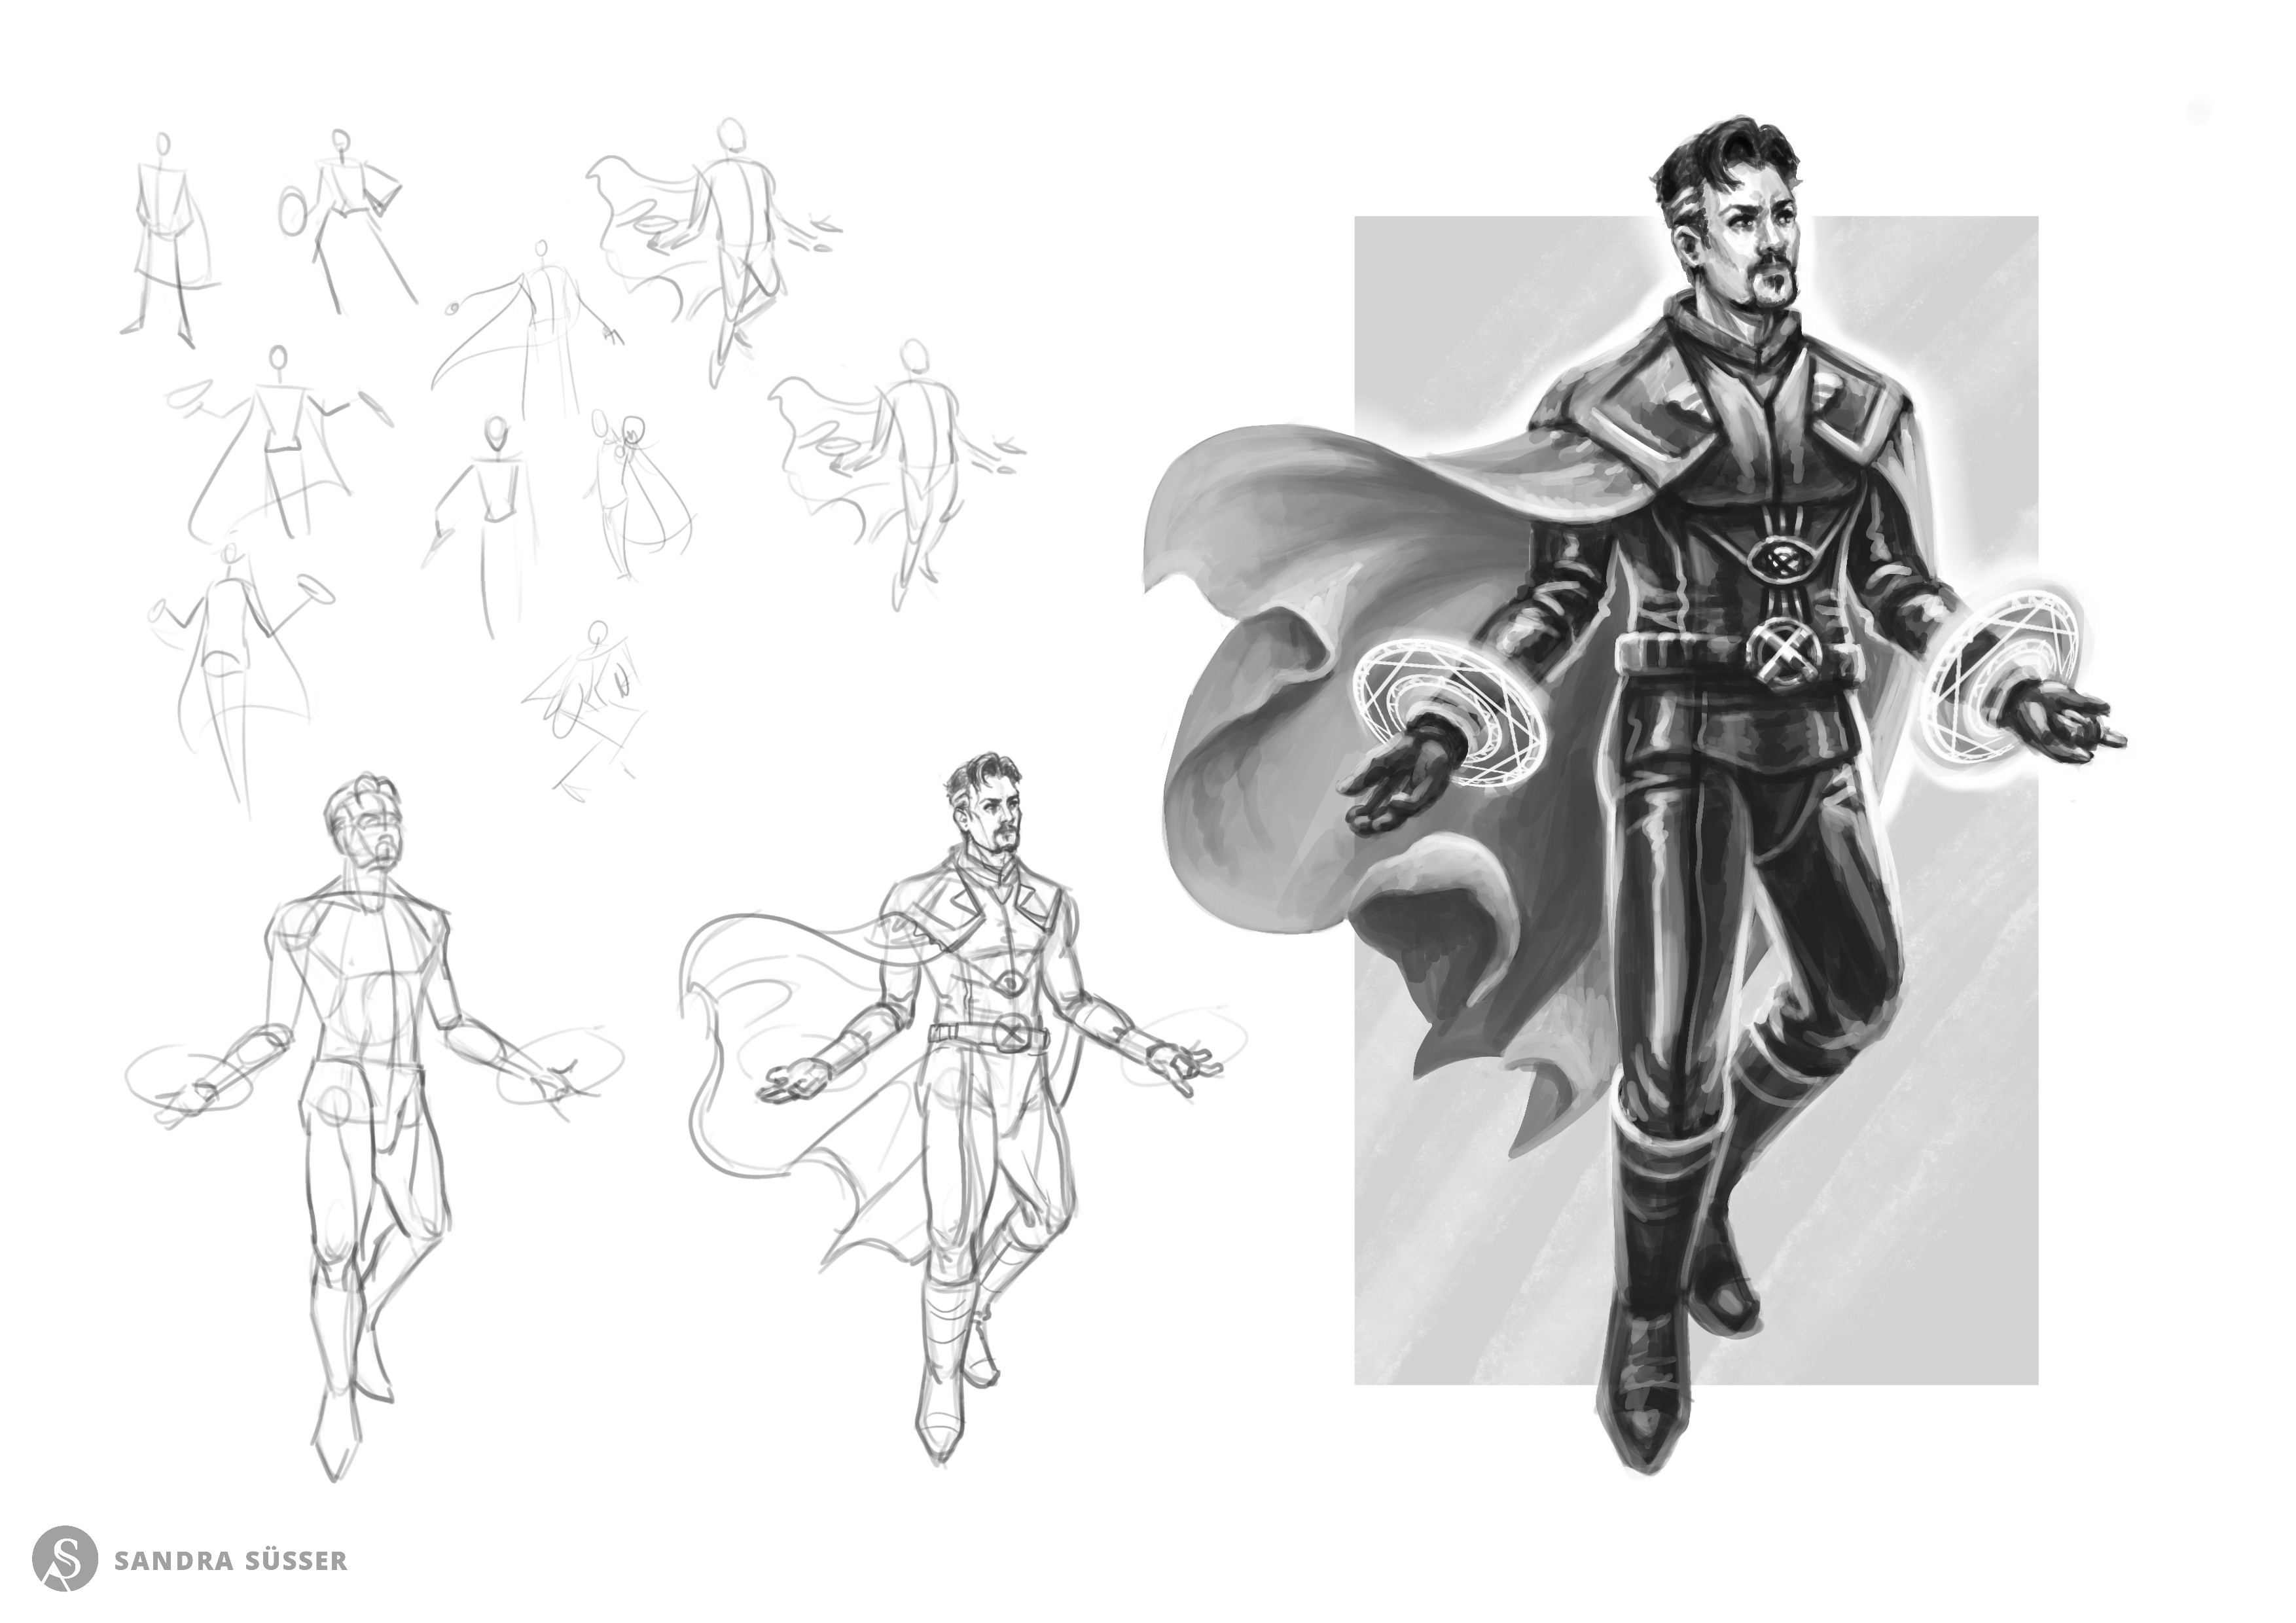 PART 2 - "What if Doctor Strange... was part of the X-Men?"